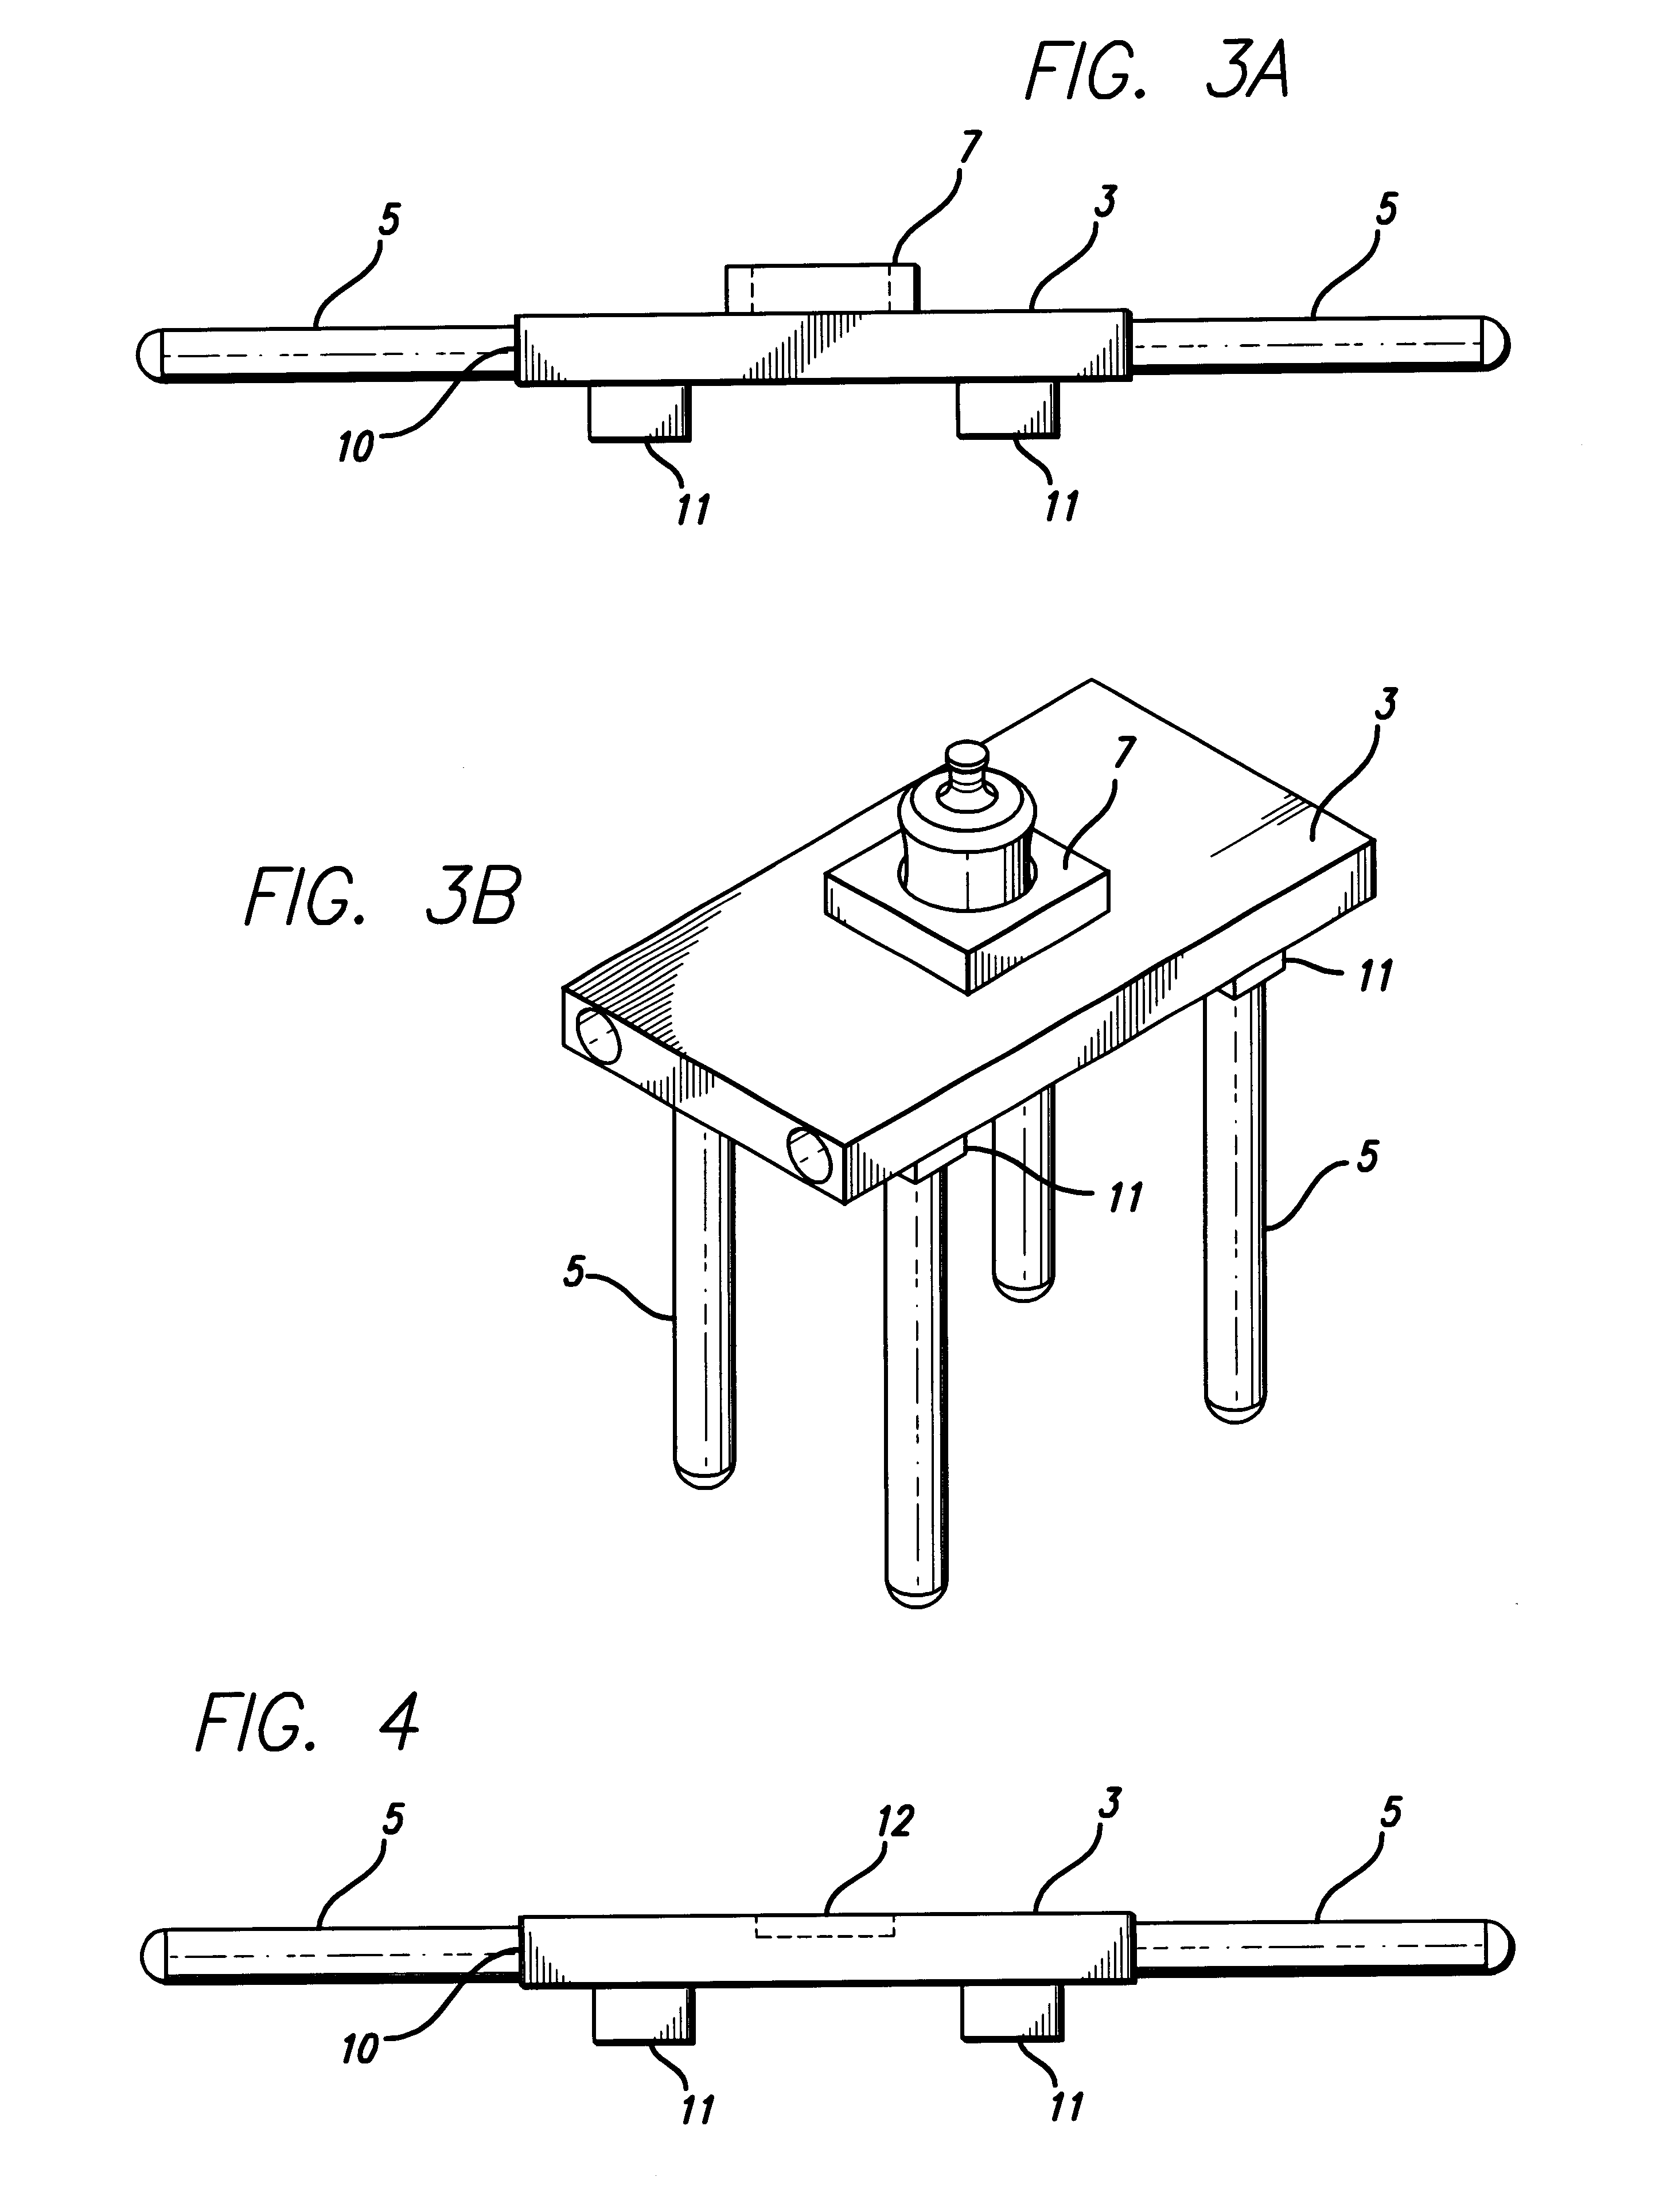 Urn carrying device